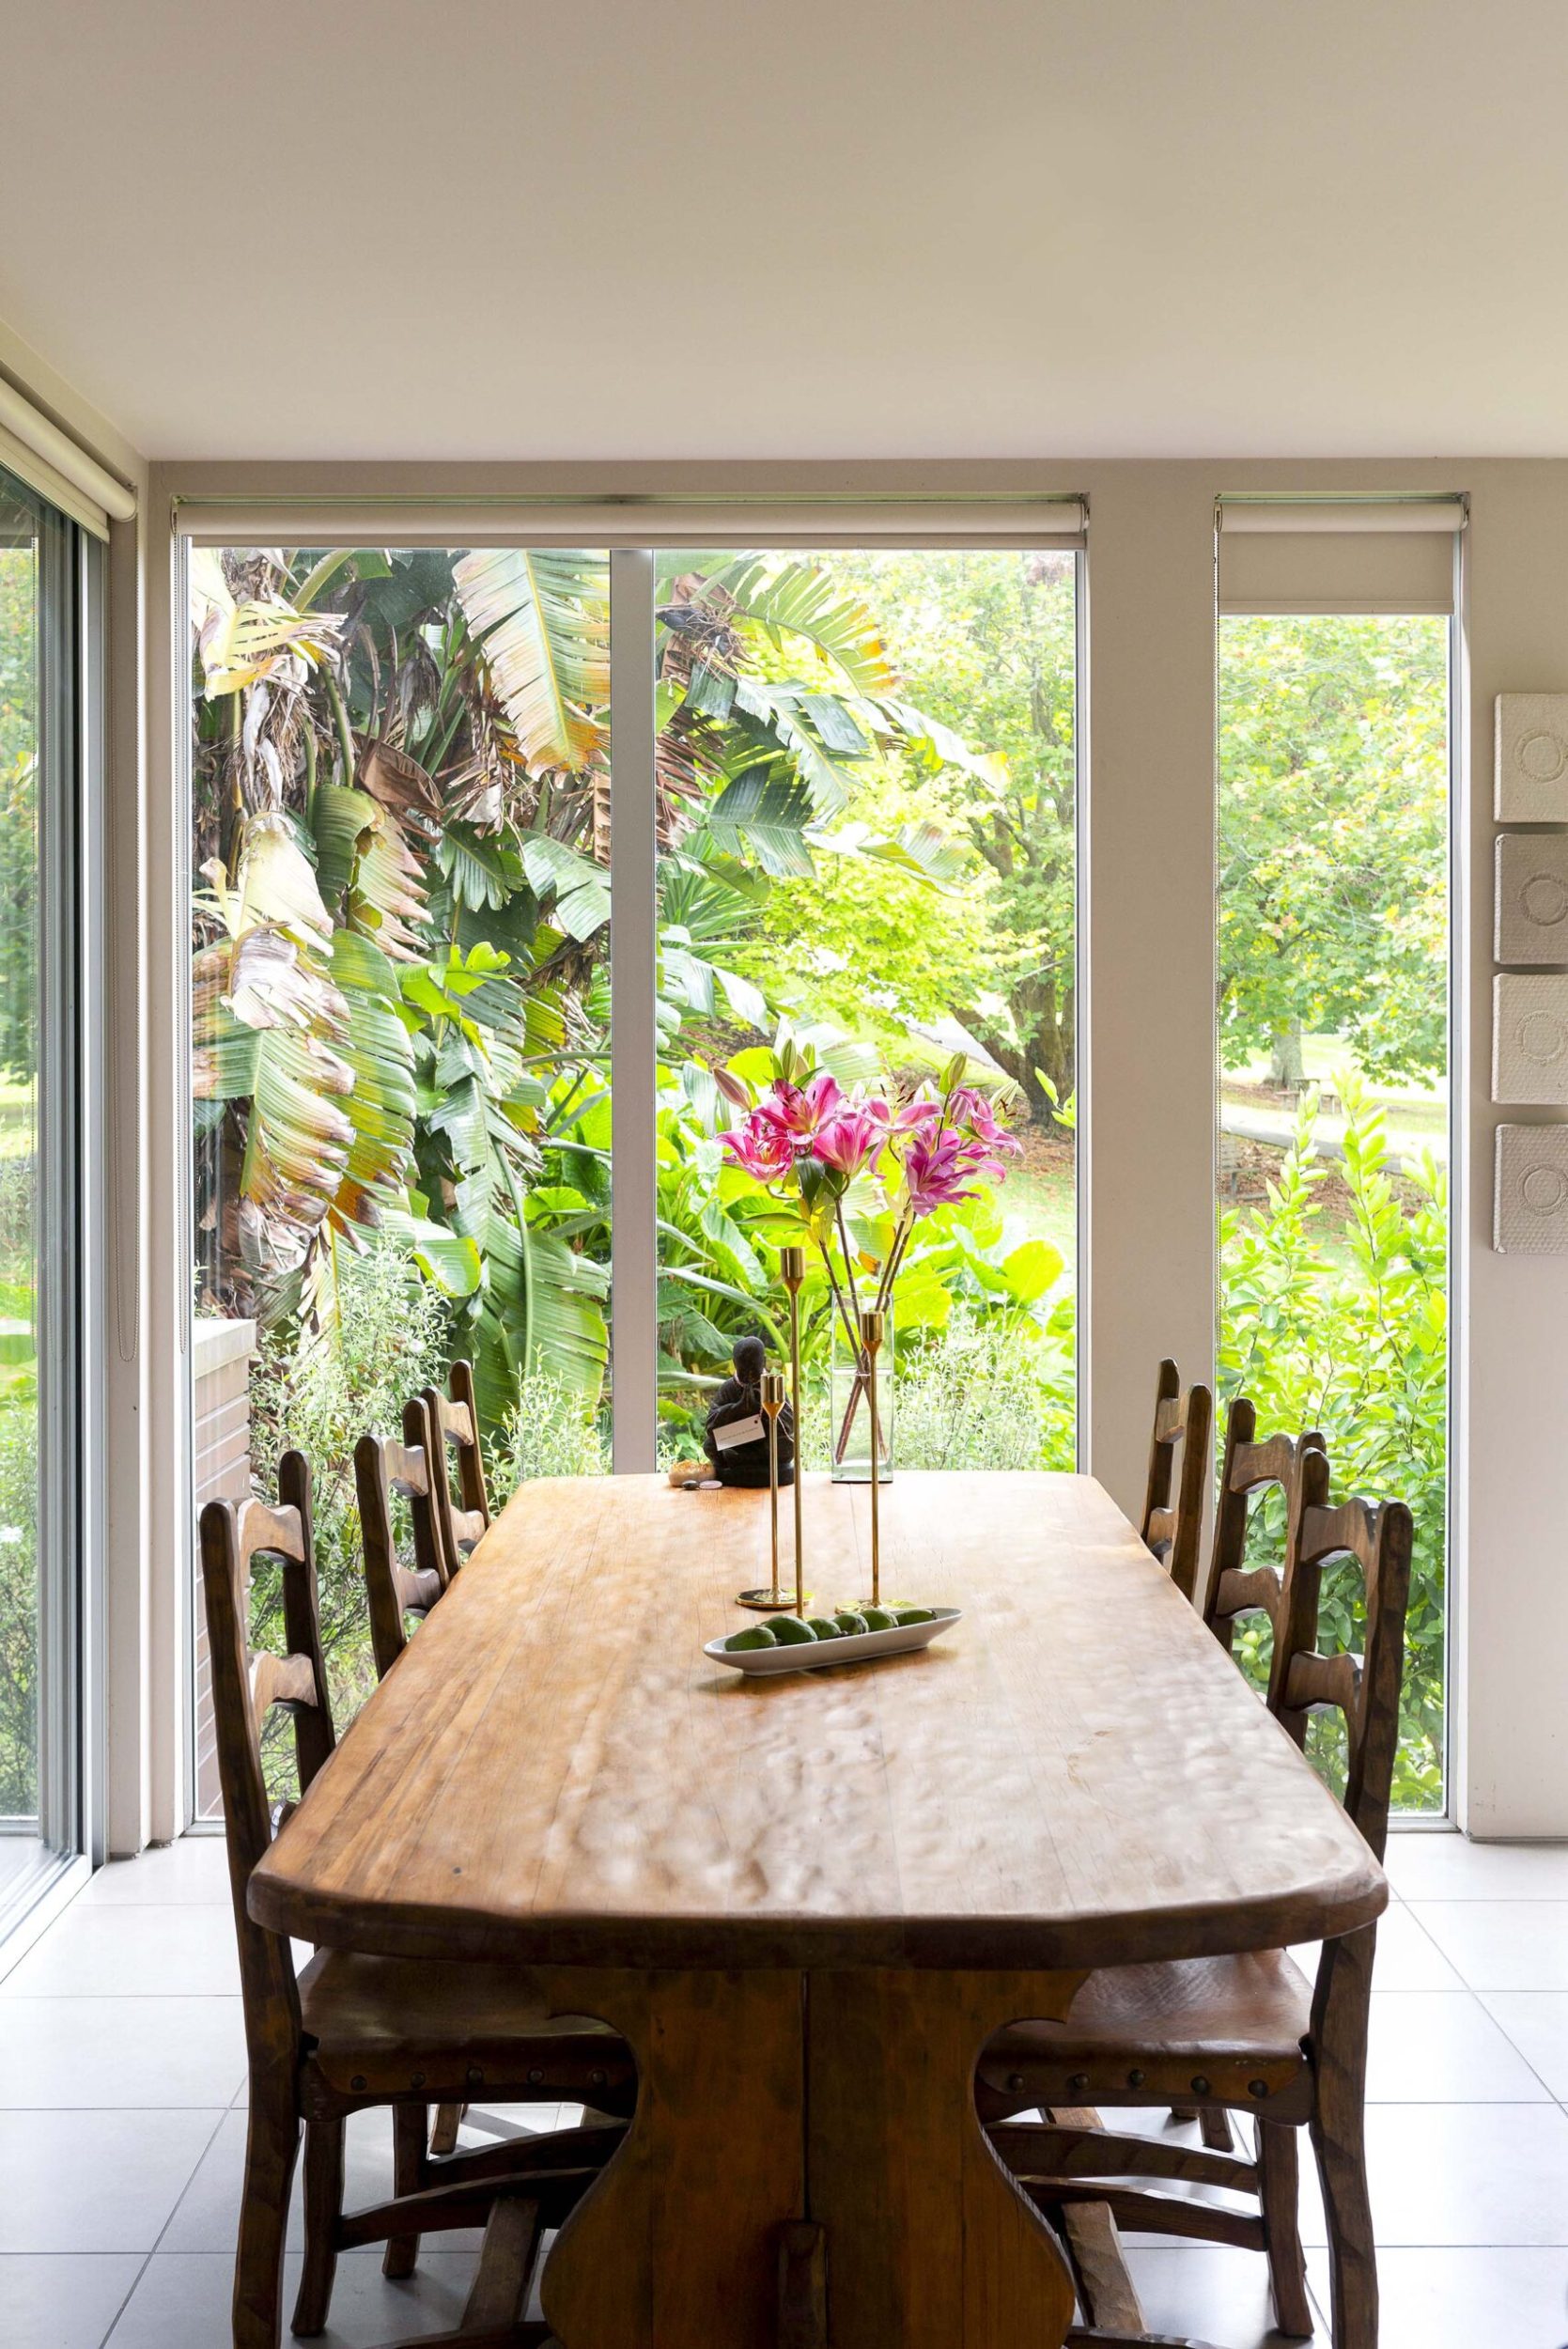 A brown dining table in a room with grey tiles and tall windows showing leafy backyard